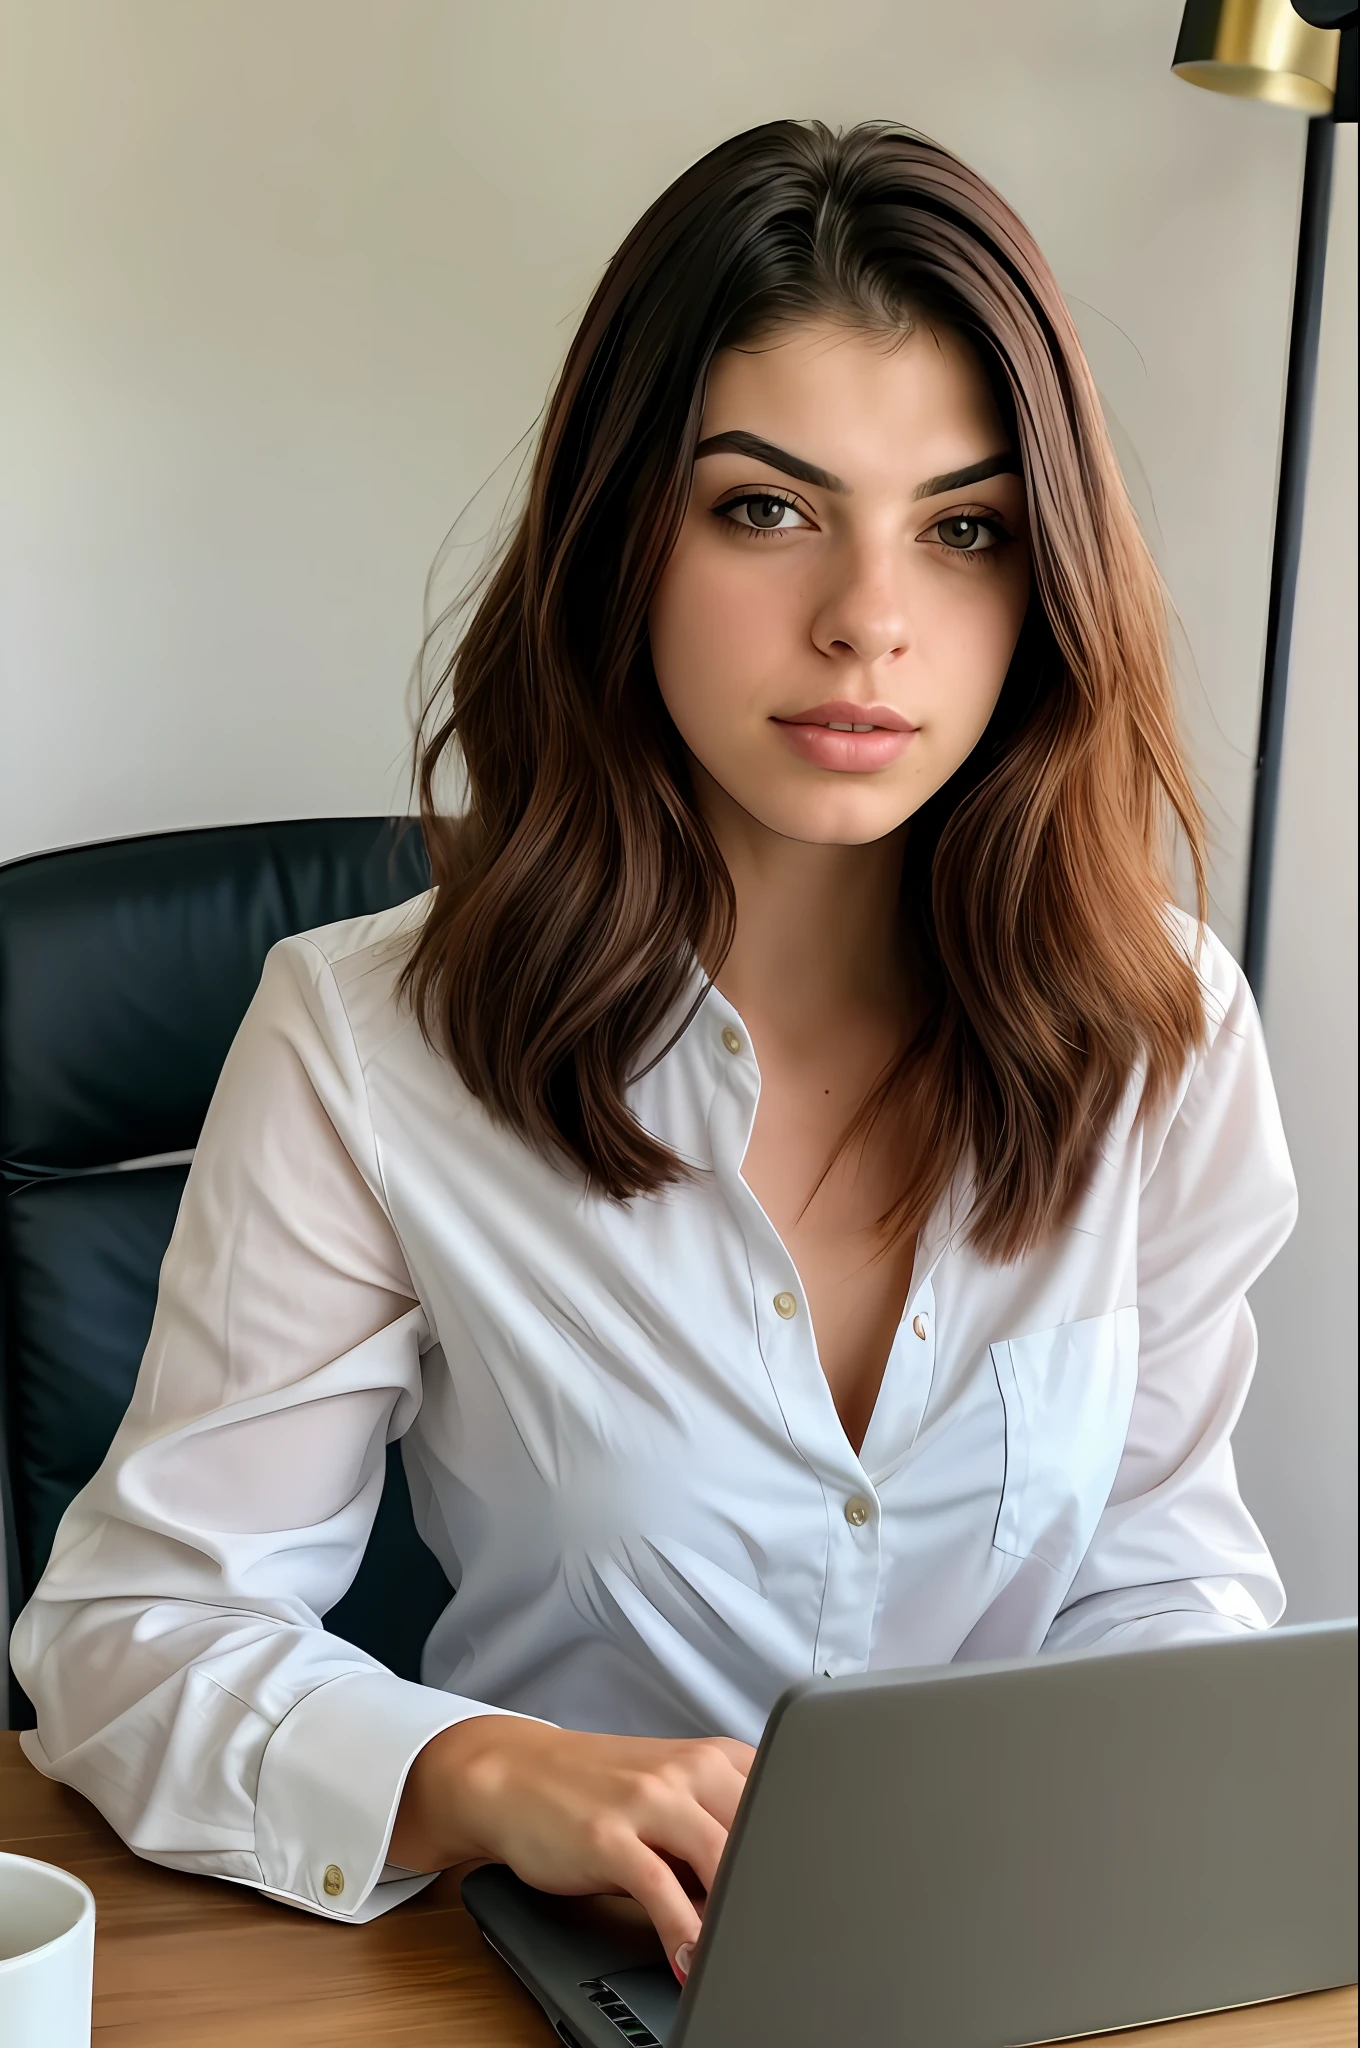 (sharp focus:1.2), photoshot, beautiful 23 year old girl, (beautiful  face:1.1), detailedeyes, lush lips, (cat eye makeup:0.85), (wavy hair), (hair blonde), (Caucasian female), using (white female social suit) woman sitting at a desk with a laptop and papers, working on his laptop, in front of a computer, sitting down em frente ao computador, working on a laptop at a desk, home office, jovana rikalo, young business woman, typing on laptop, sitting down, creative coder with a computer, (grumpy lighting: 1.2), Depth of field, bokeh, 8K, photoshot realista, super detailed